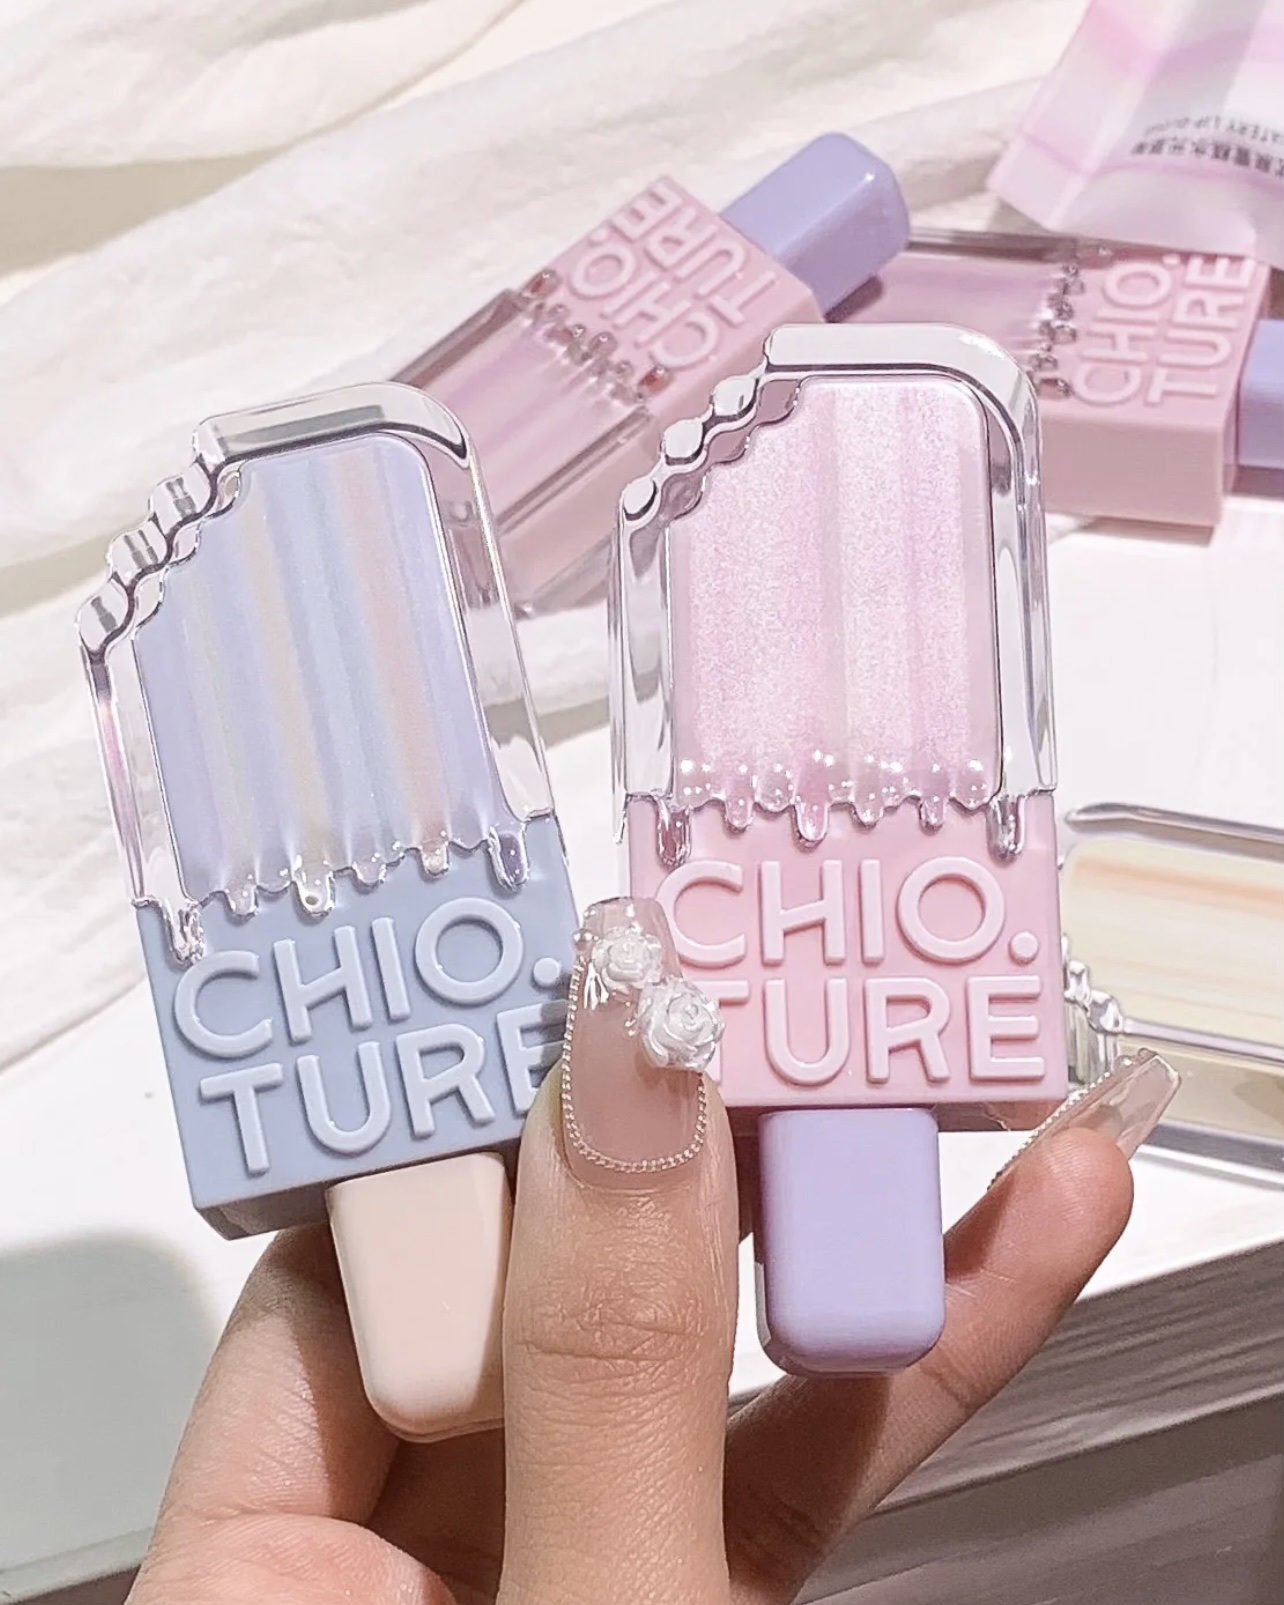 CHIOTURE Son bóng Chioture Ice Cream Watery Lip Gloss